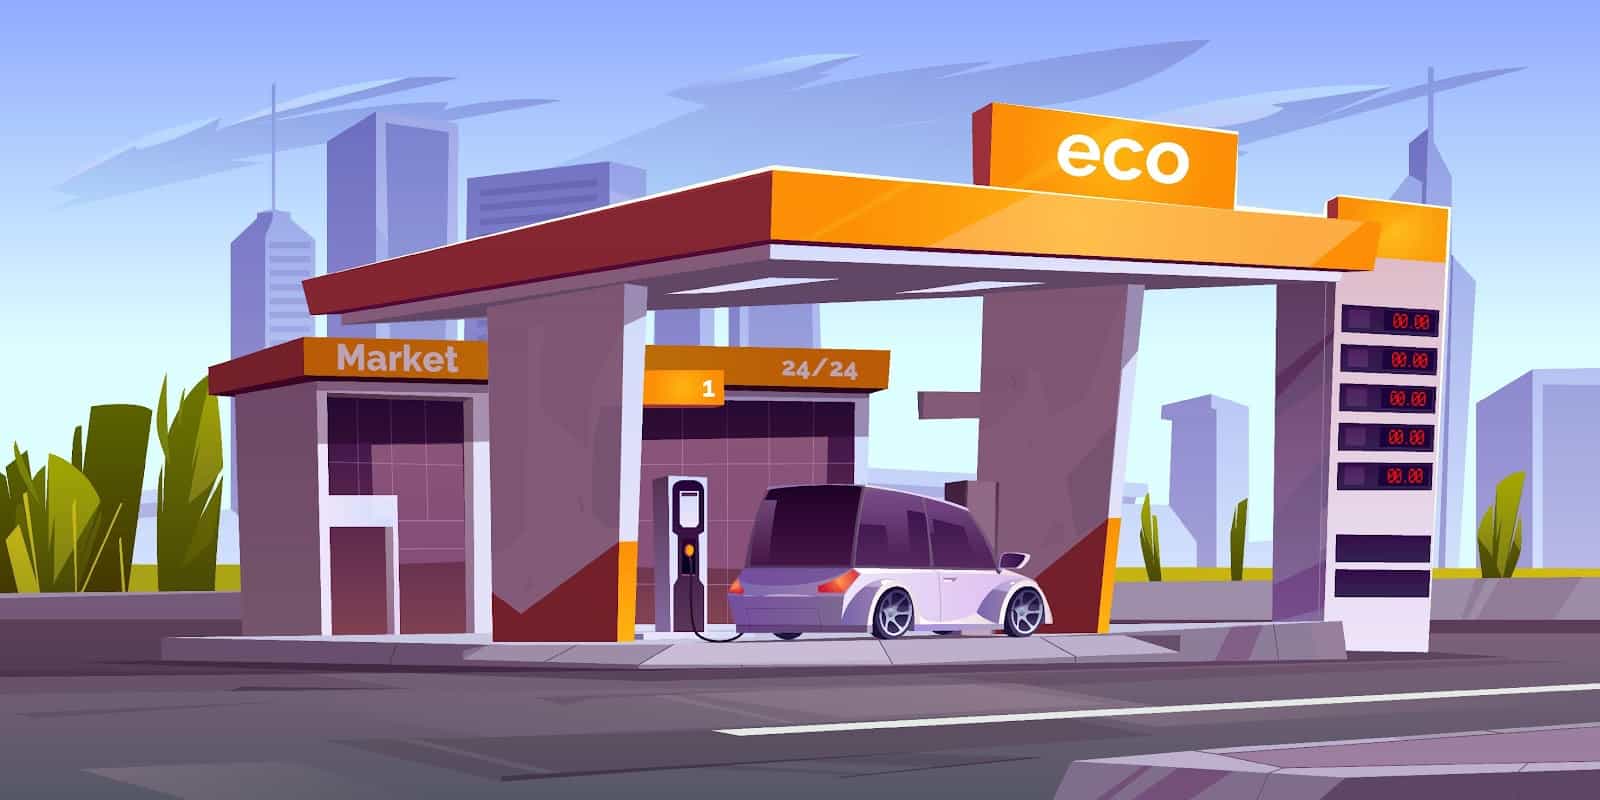 How should I Charge my Car? Everything you need to know about EV Charging